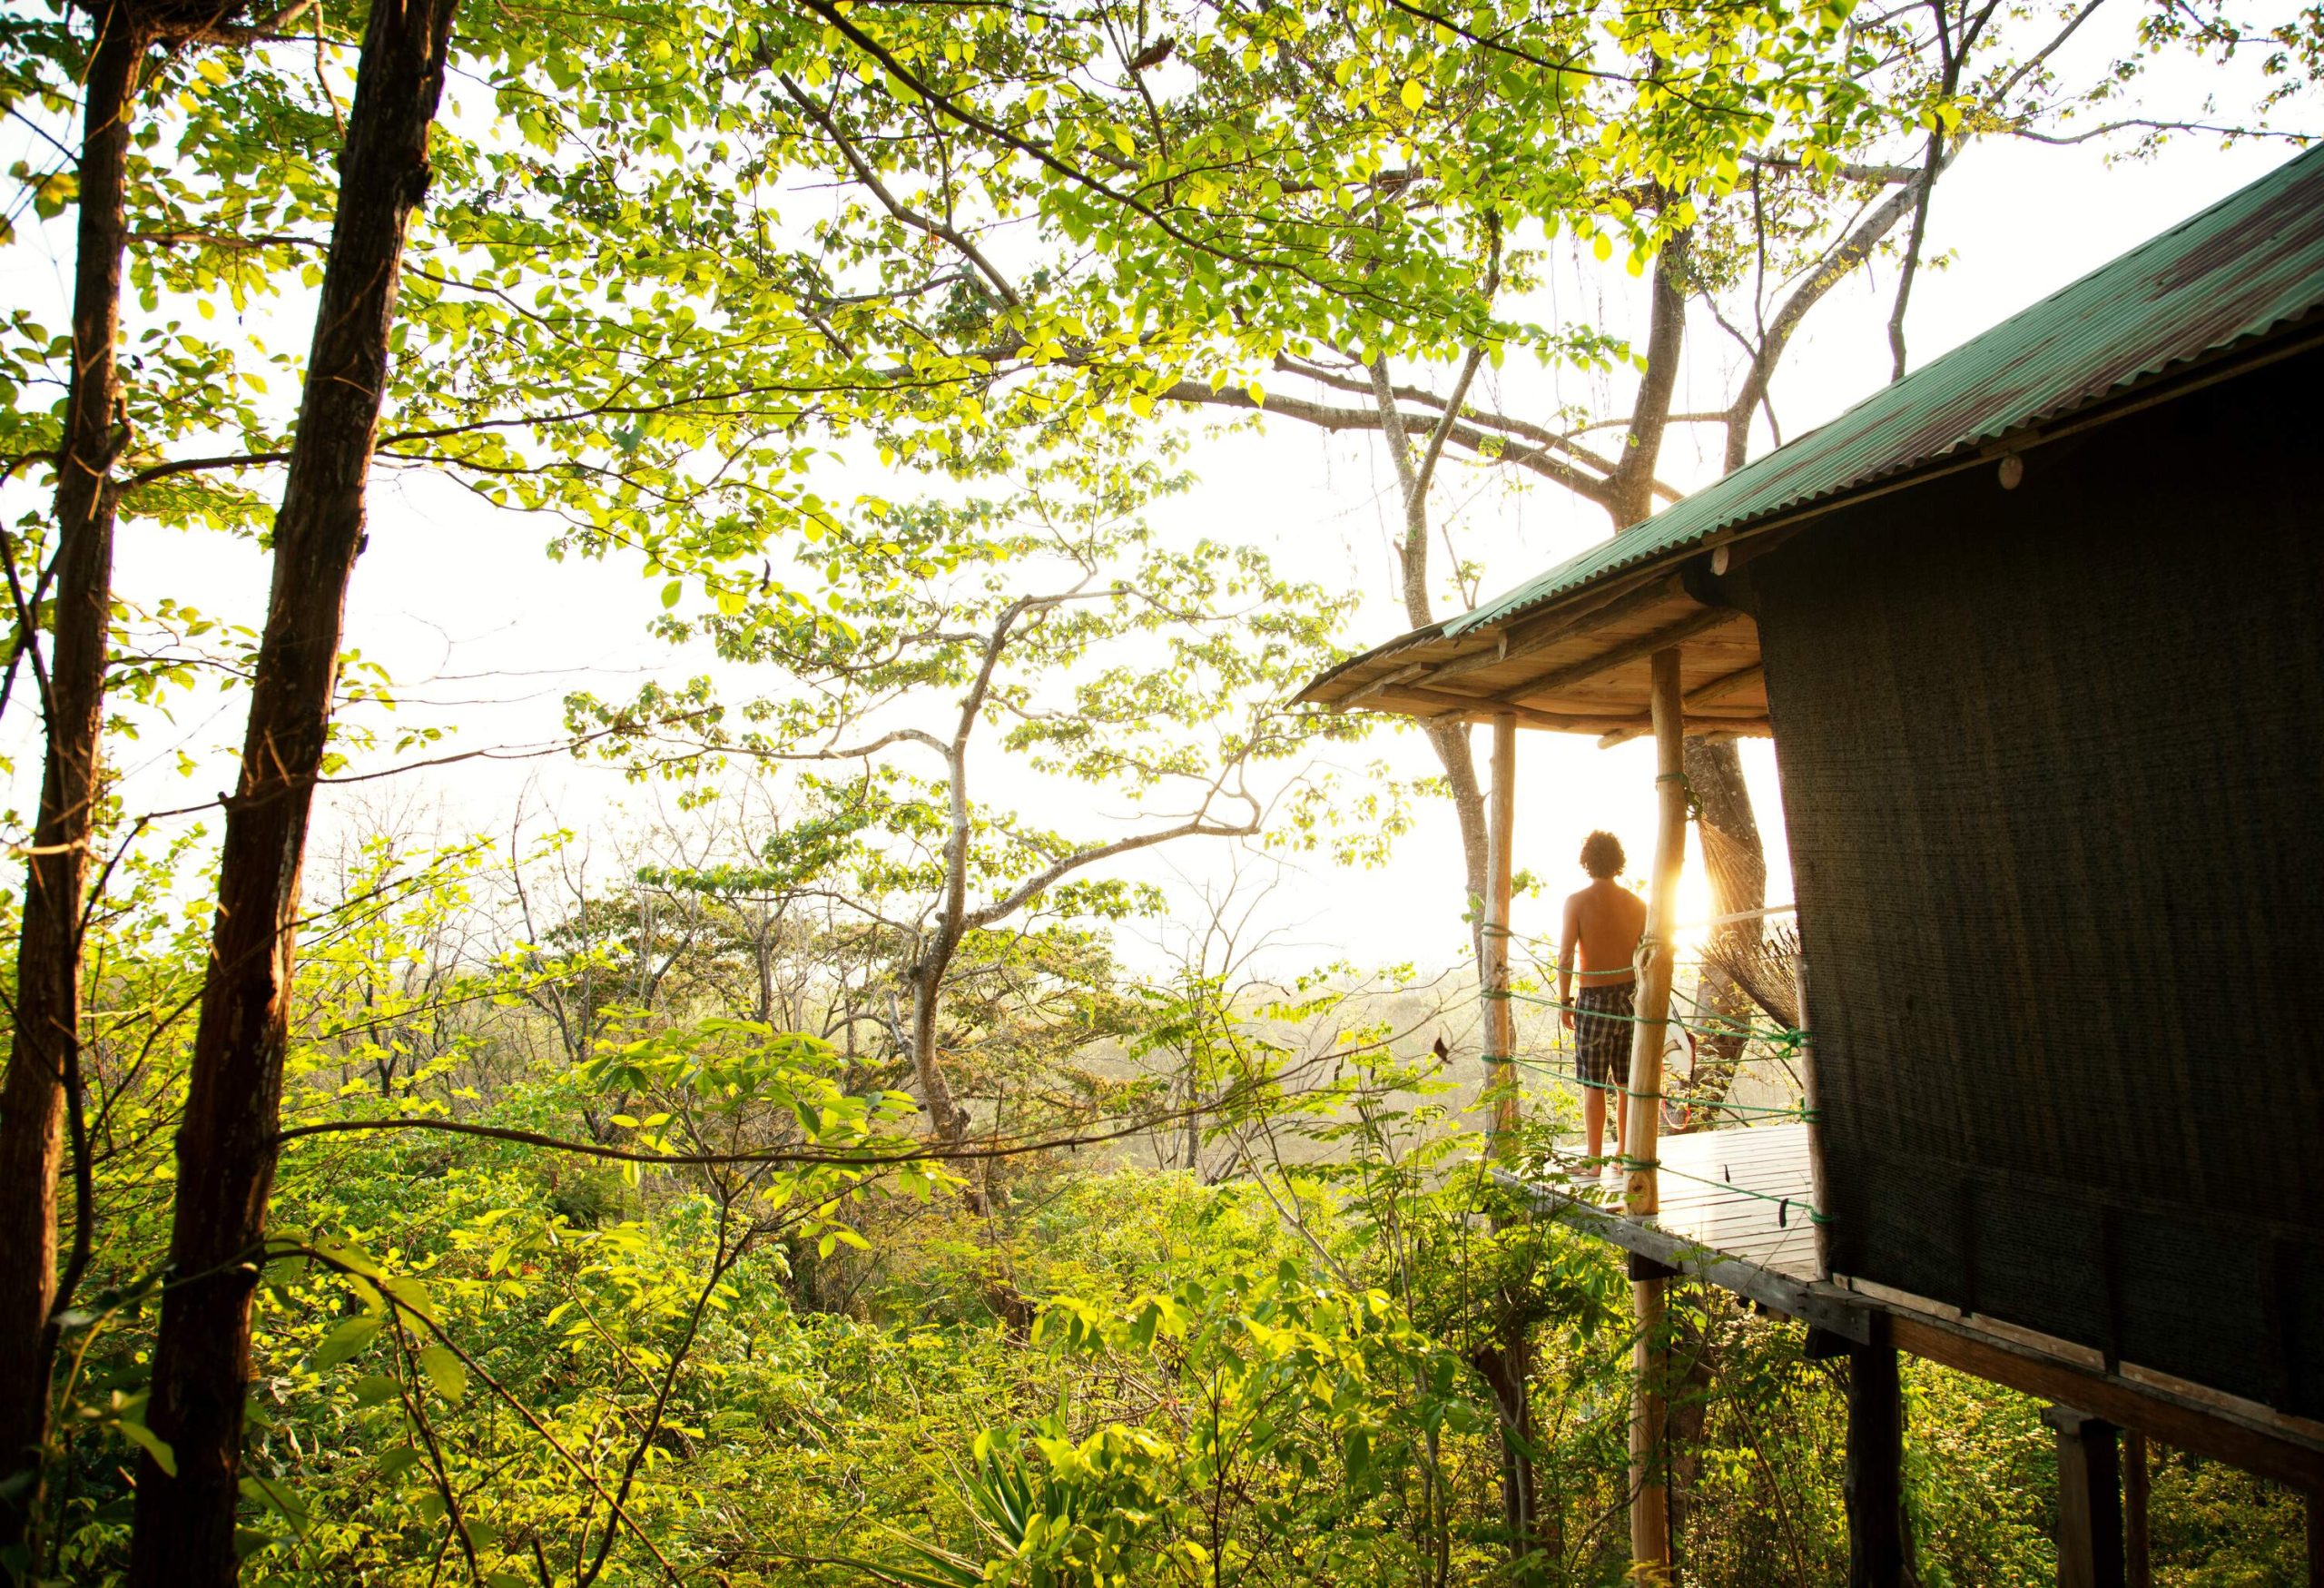 A man stands on the terrace of a tree house and gazes at a forested landscape.